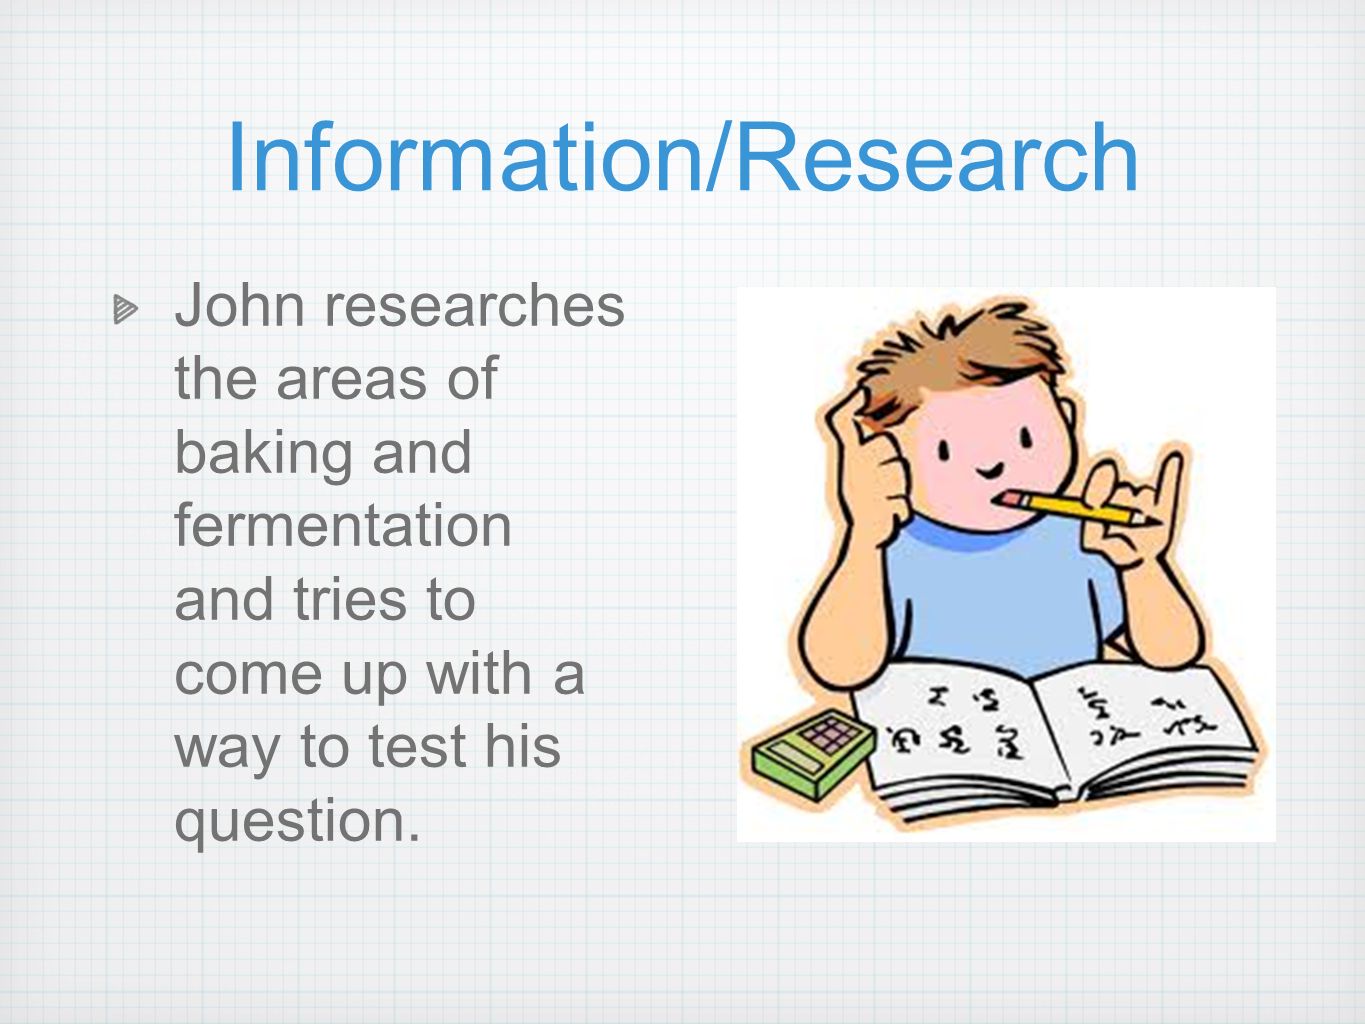 Information/Research John researches the areas of baking and fermentation and tries to come up with a way to test his question.